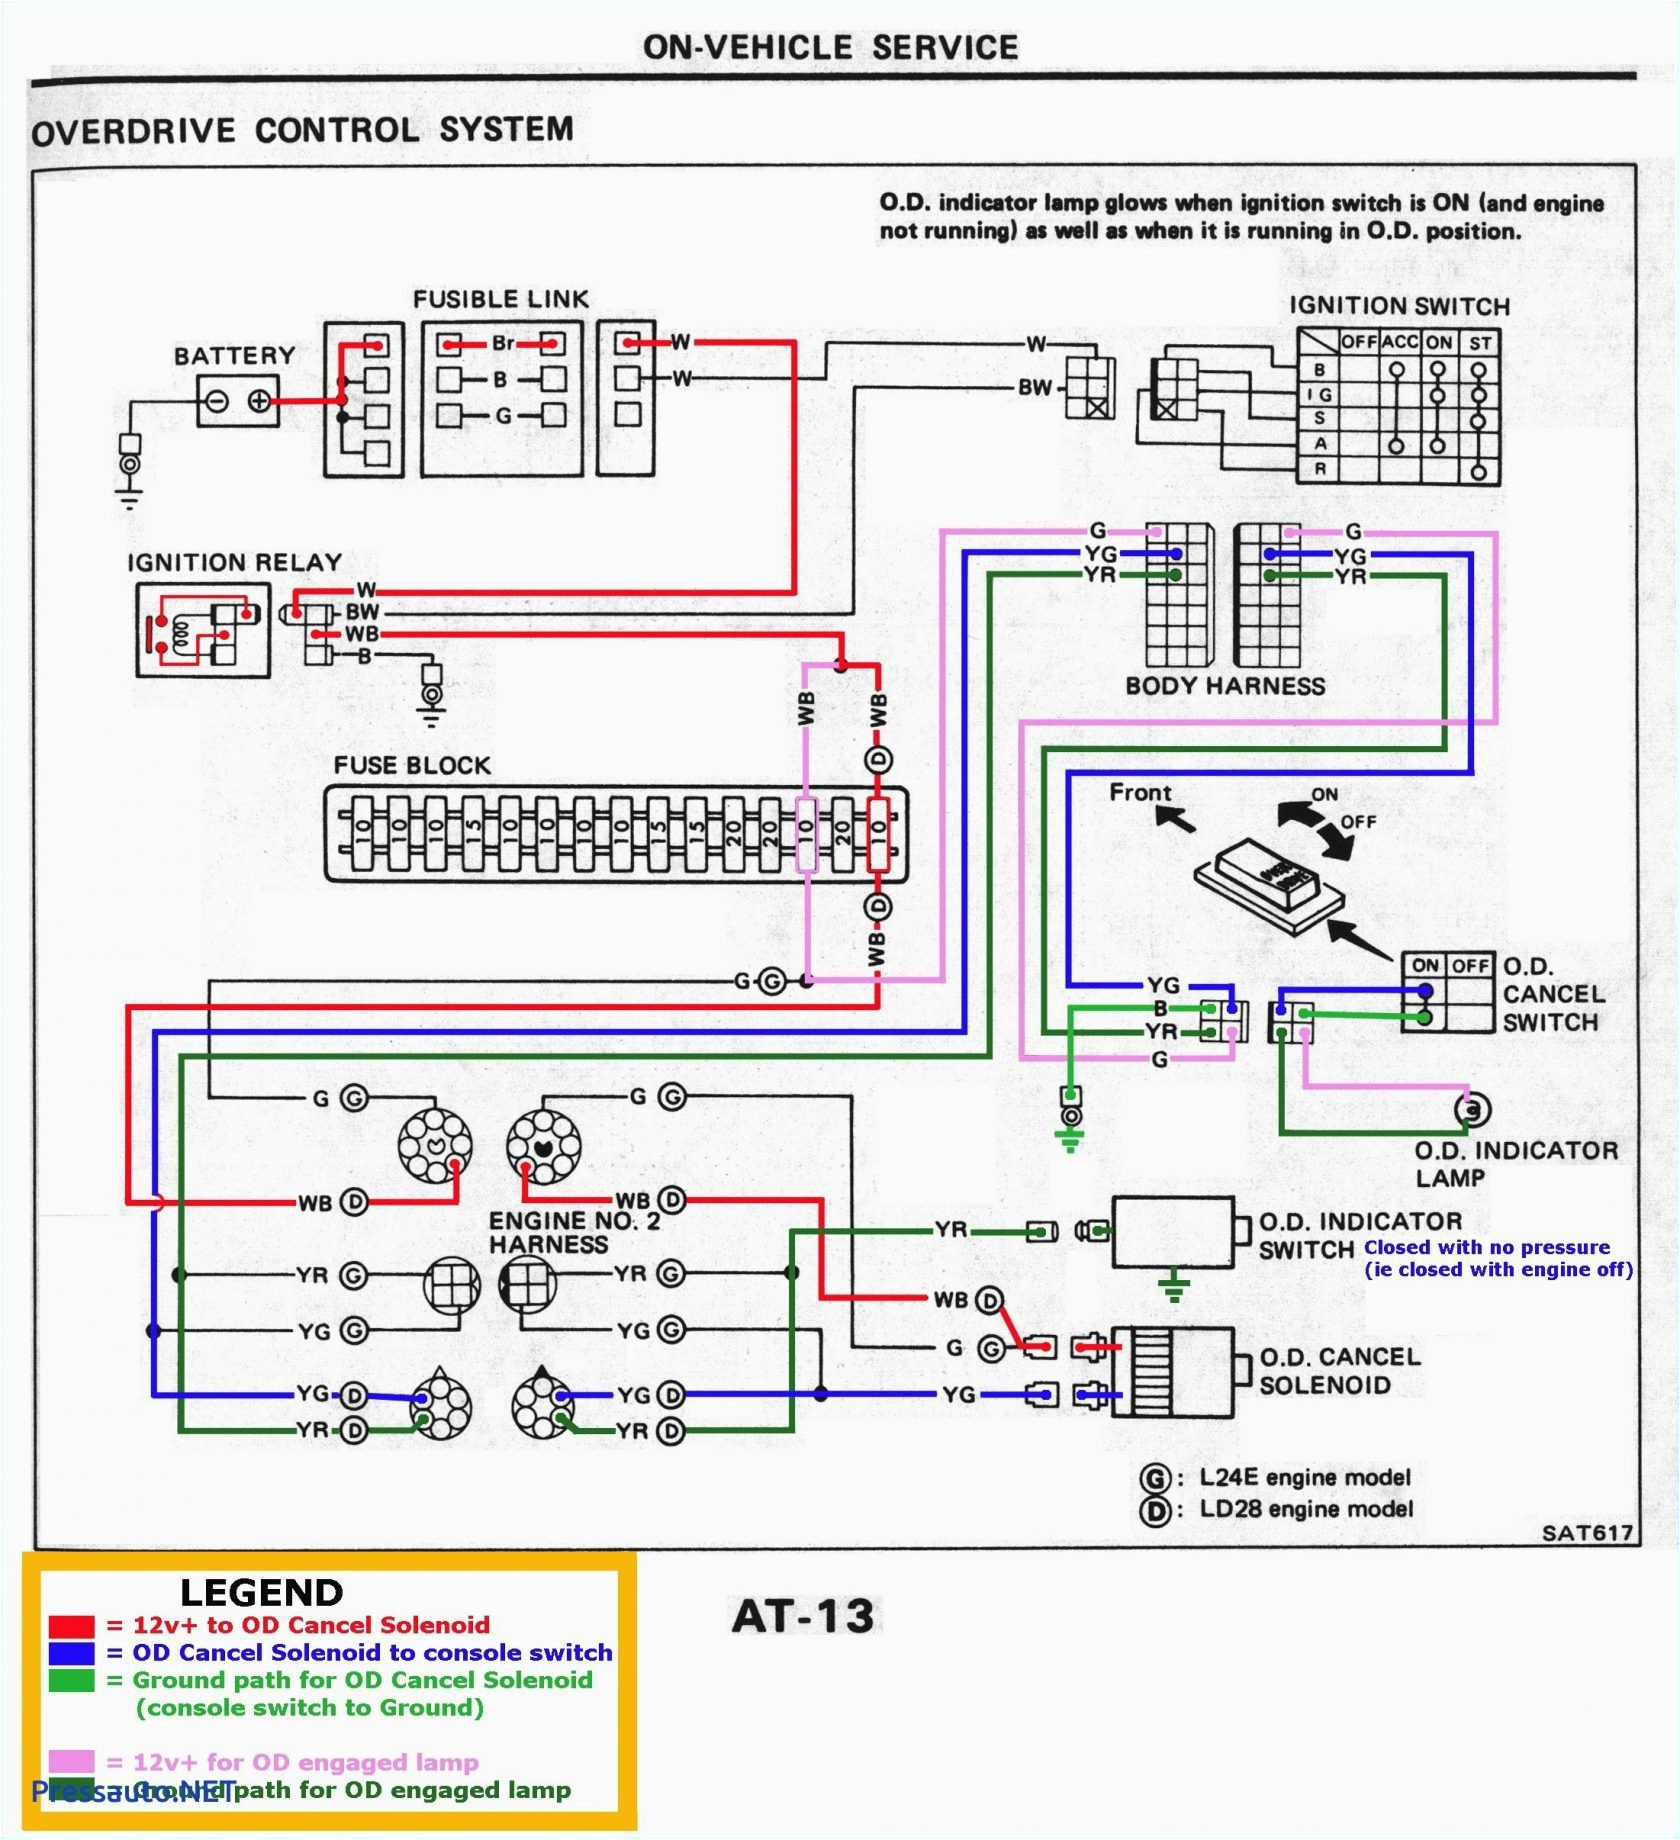 ase test preparation wires connectors wiring diagrams wiring diagram show